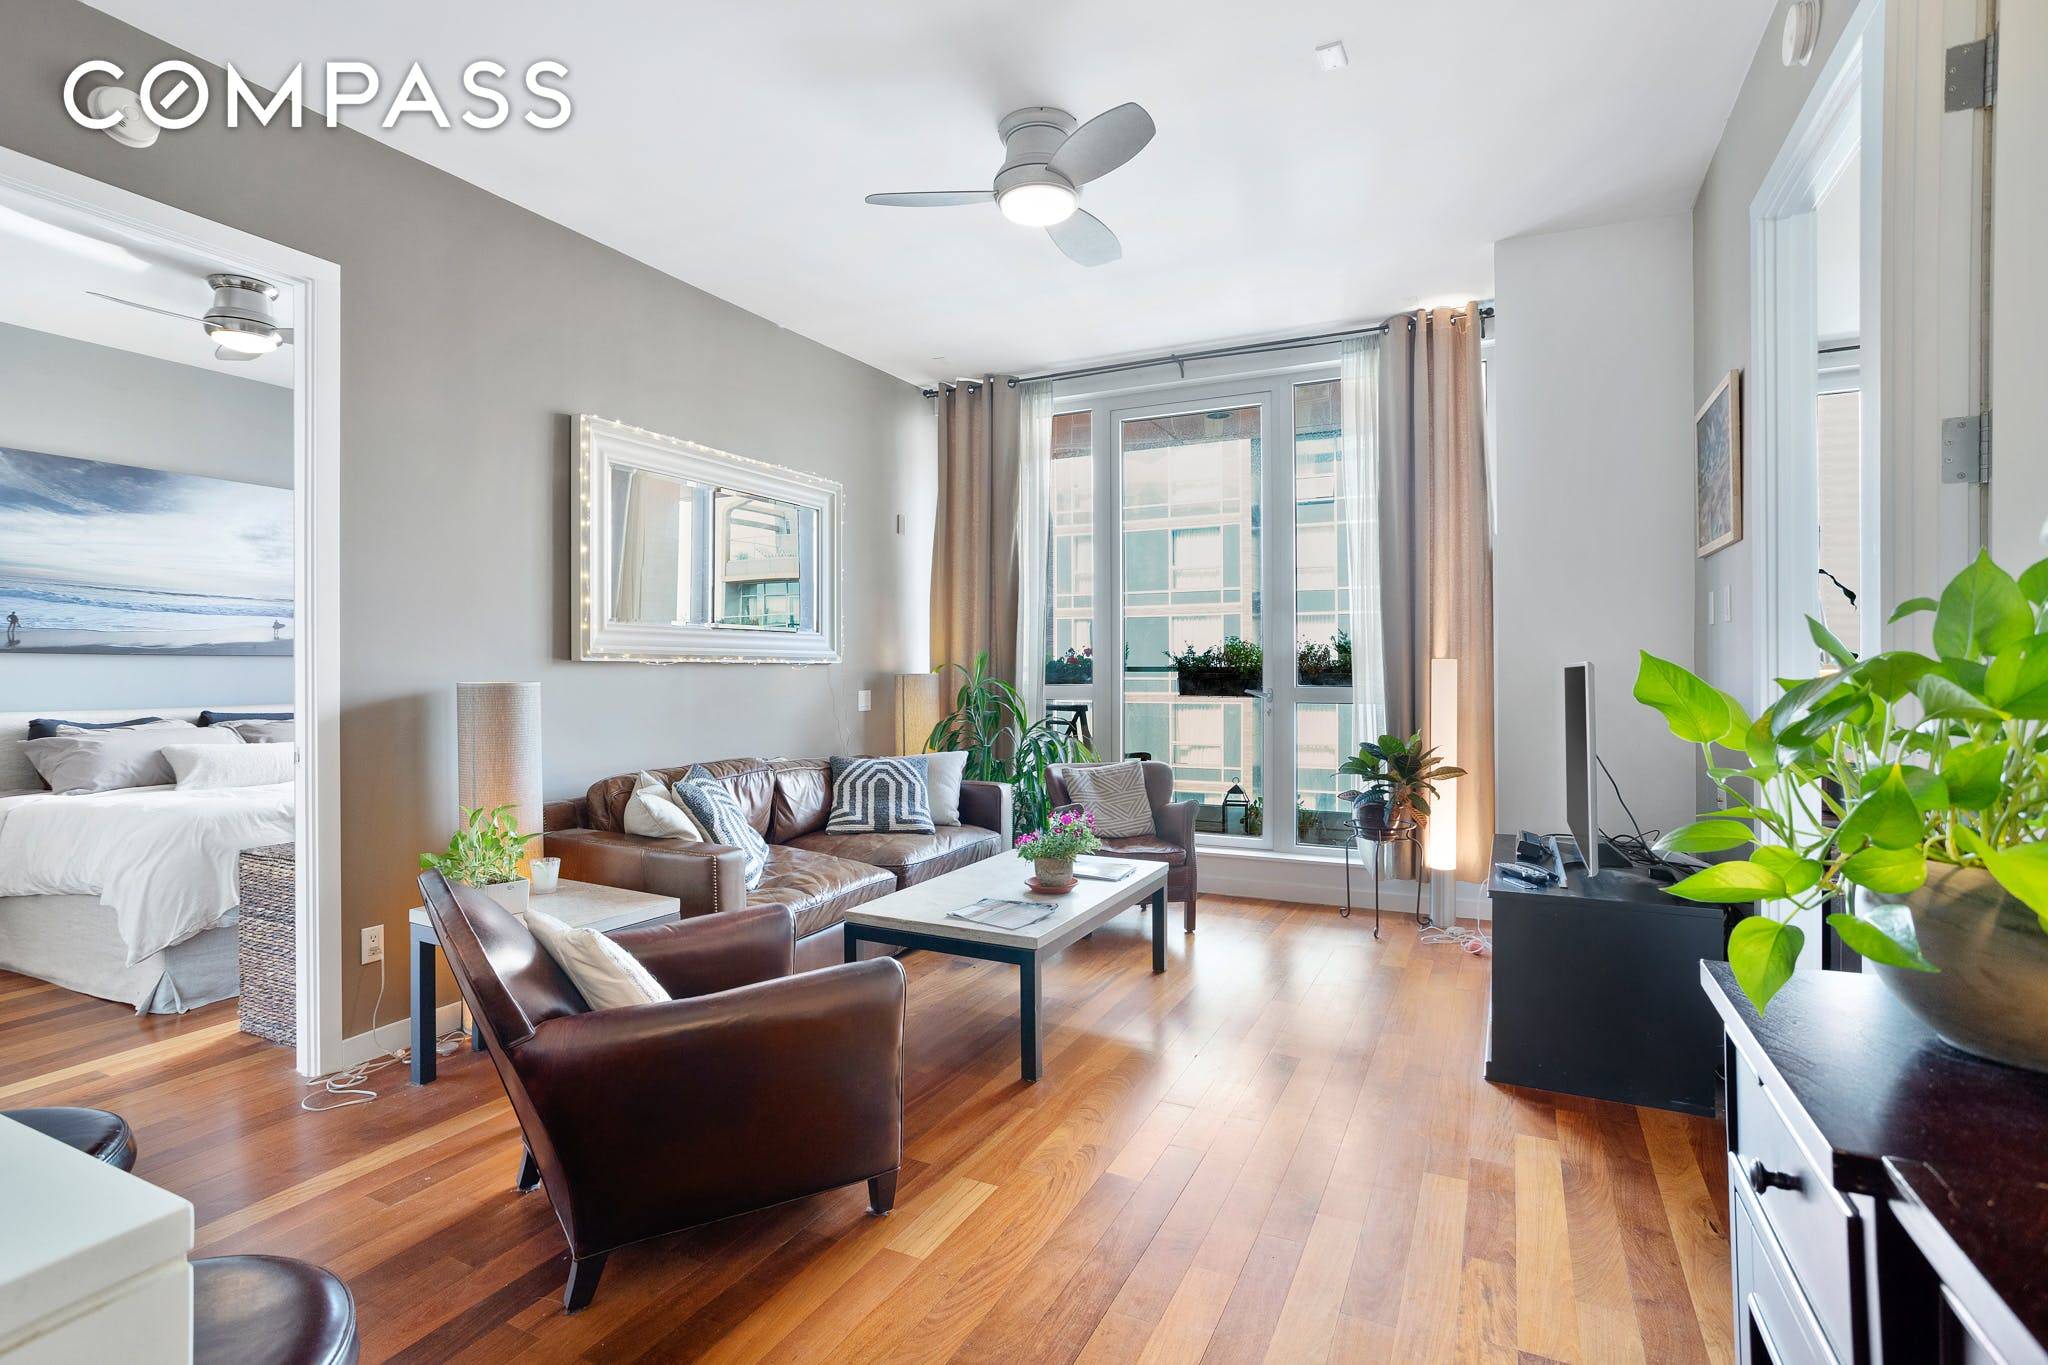 An immaculate Brooklyn Furnished Rental in the heart of Williamsburg, steps from McCarren Park, and 4 short blocks to the L train, 15 mins to Union Square.